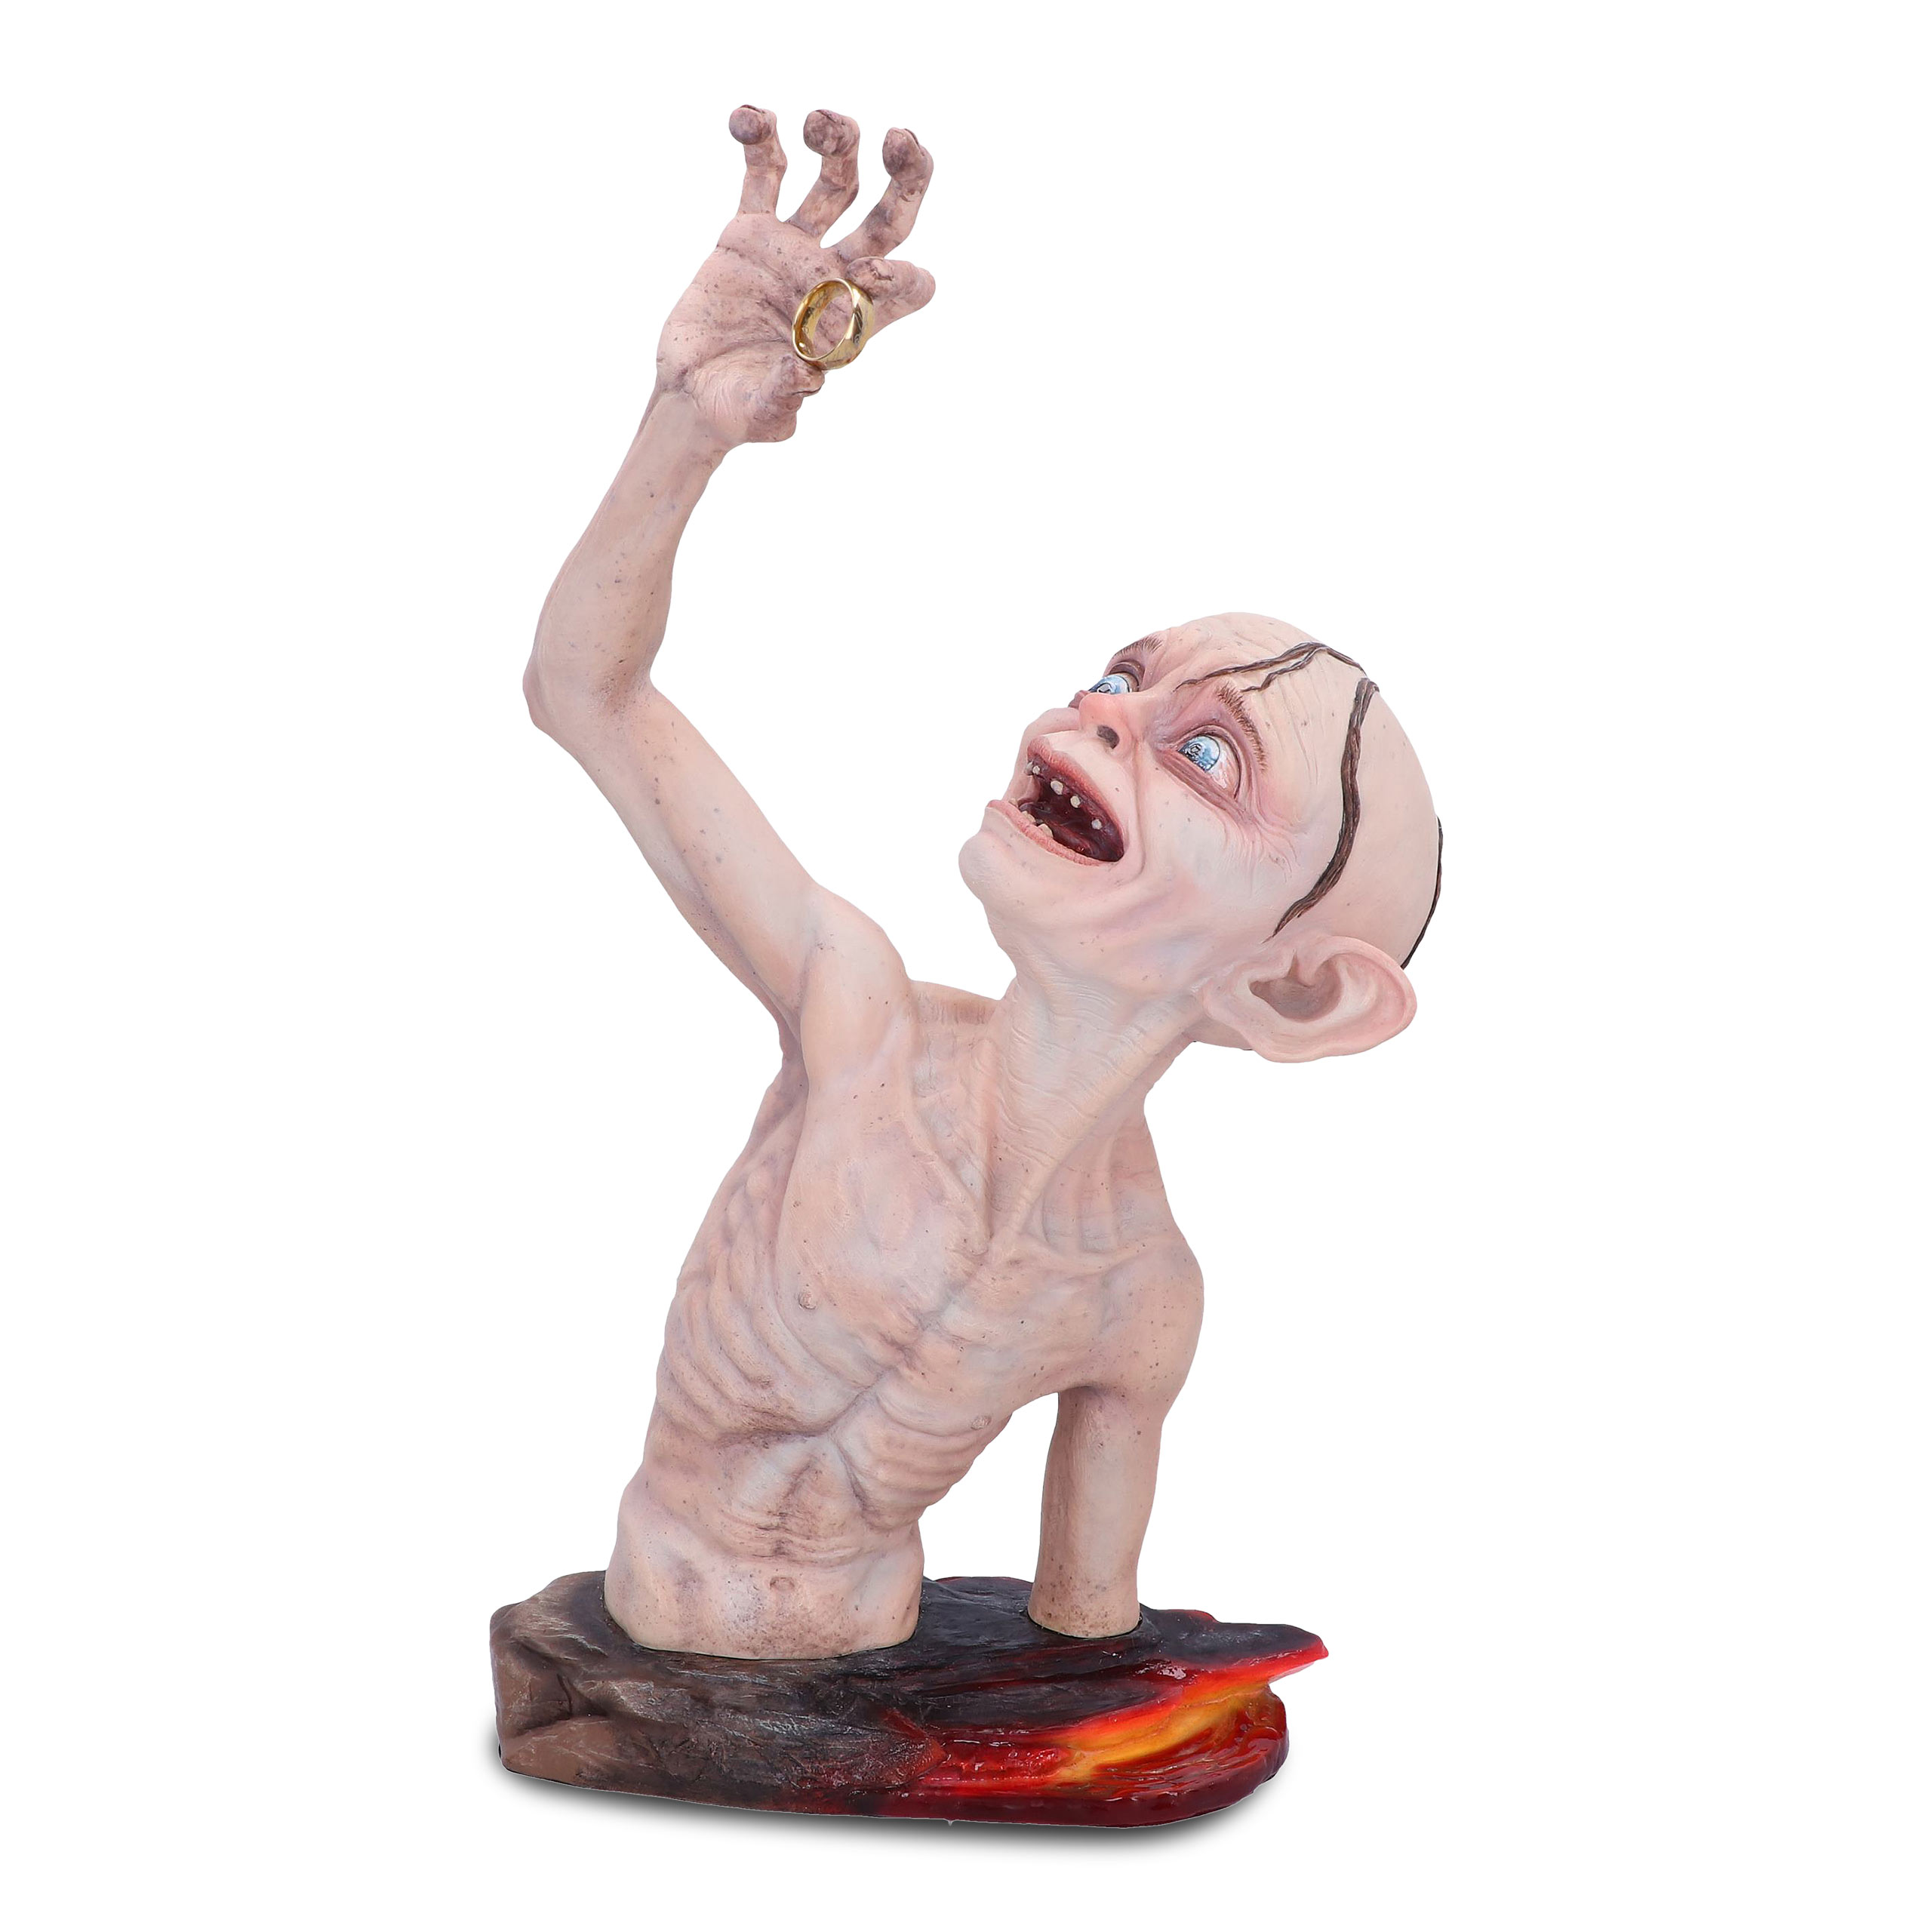 Lord of the Rings - Gollum Bust Deluxe